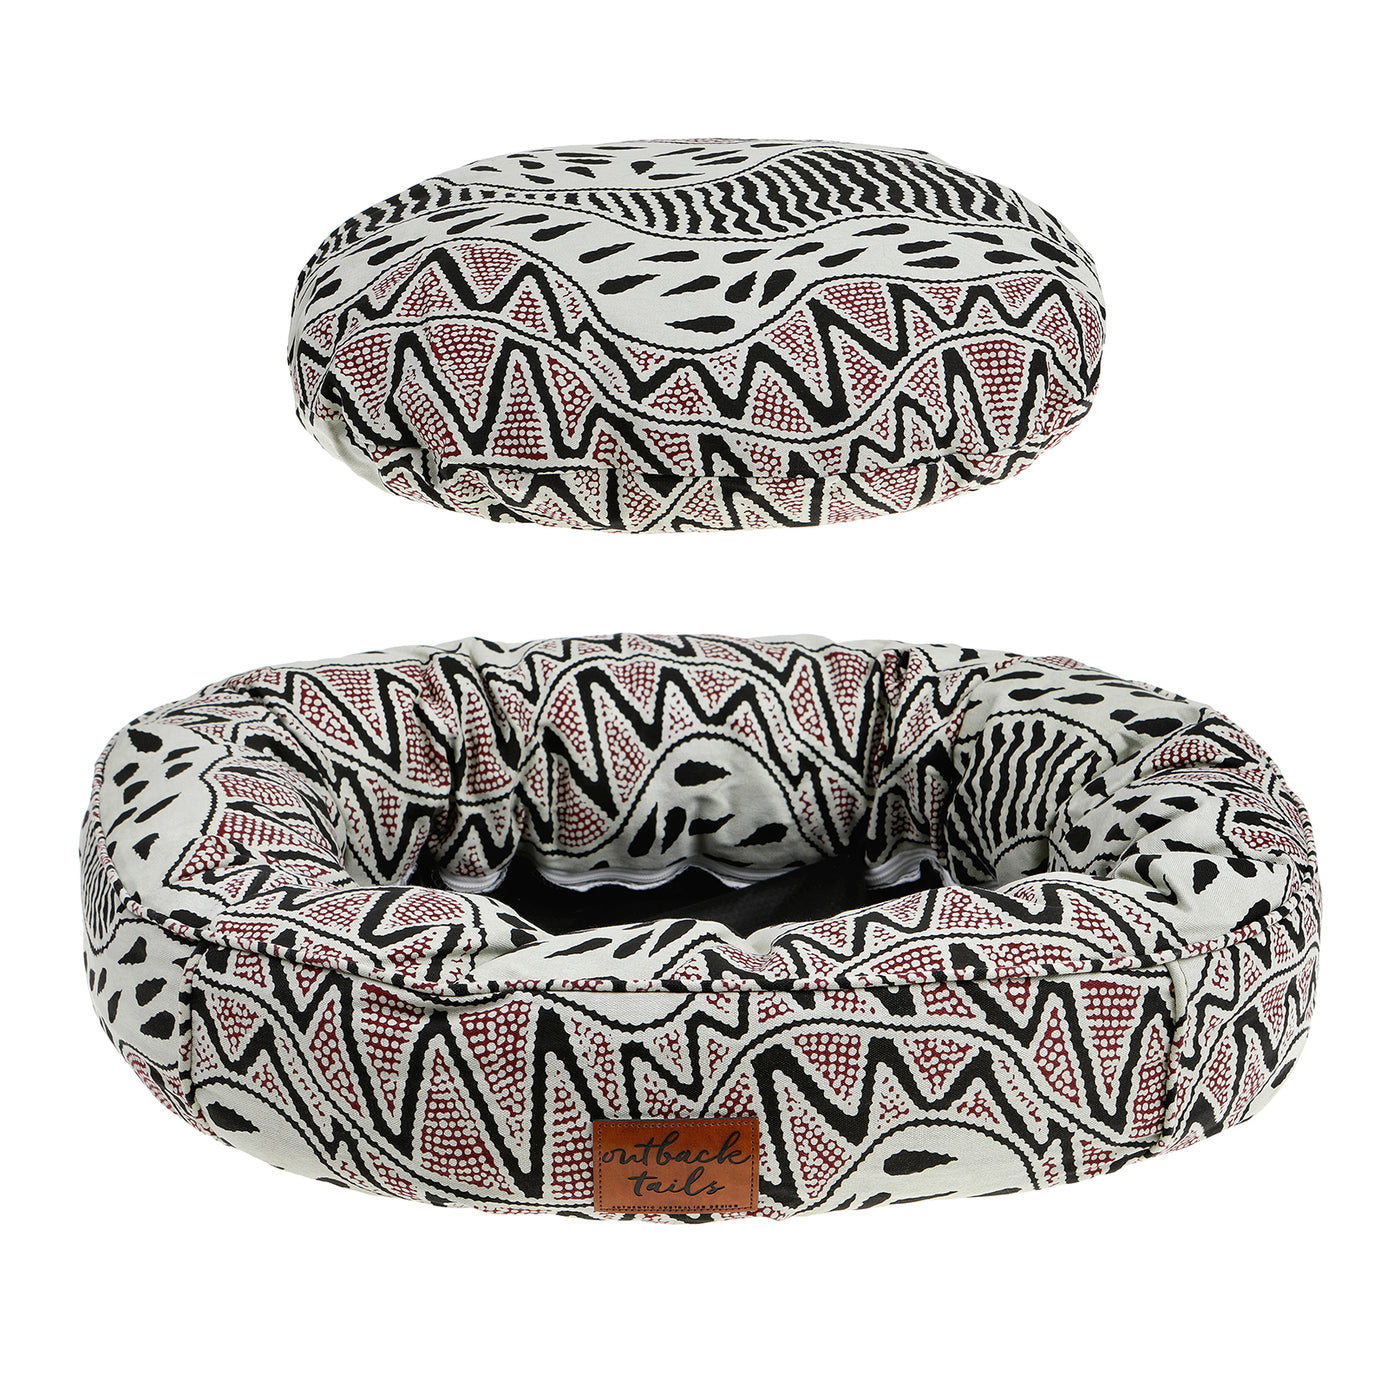 Round Therapeutic Dog Bed - Vaughan Springs